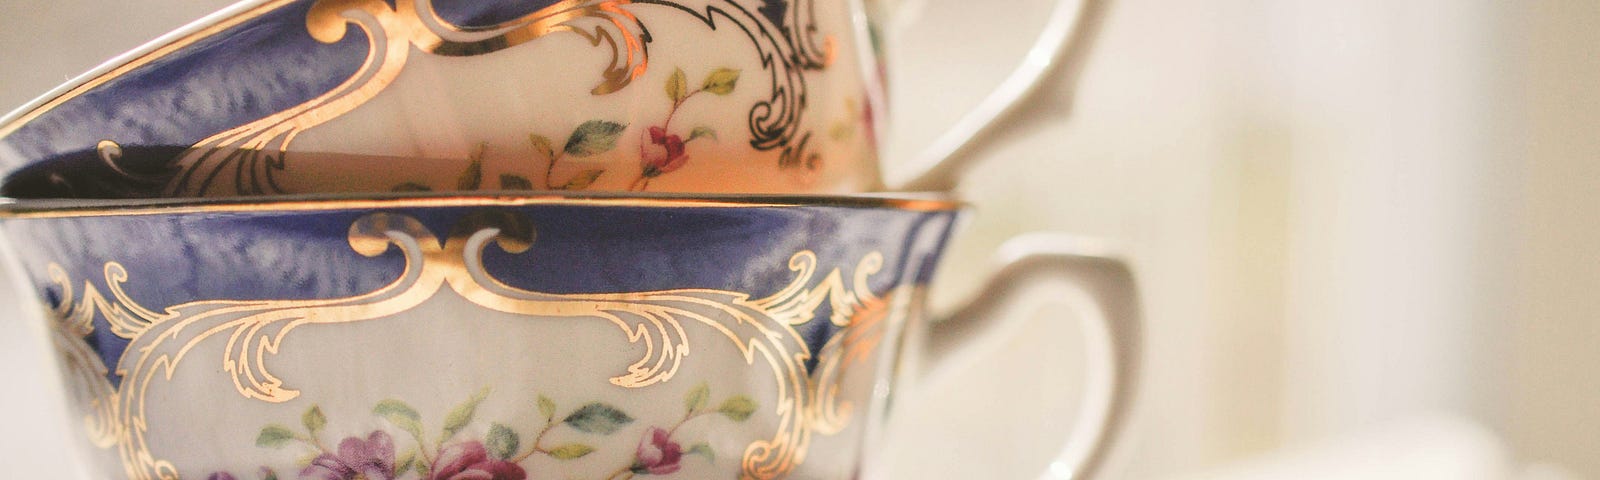 two china tea cups and saucers